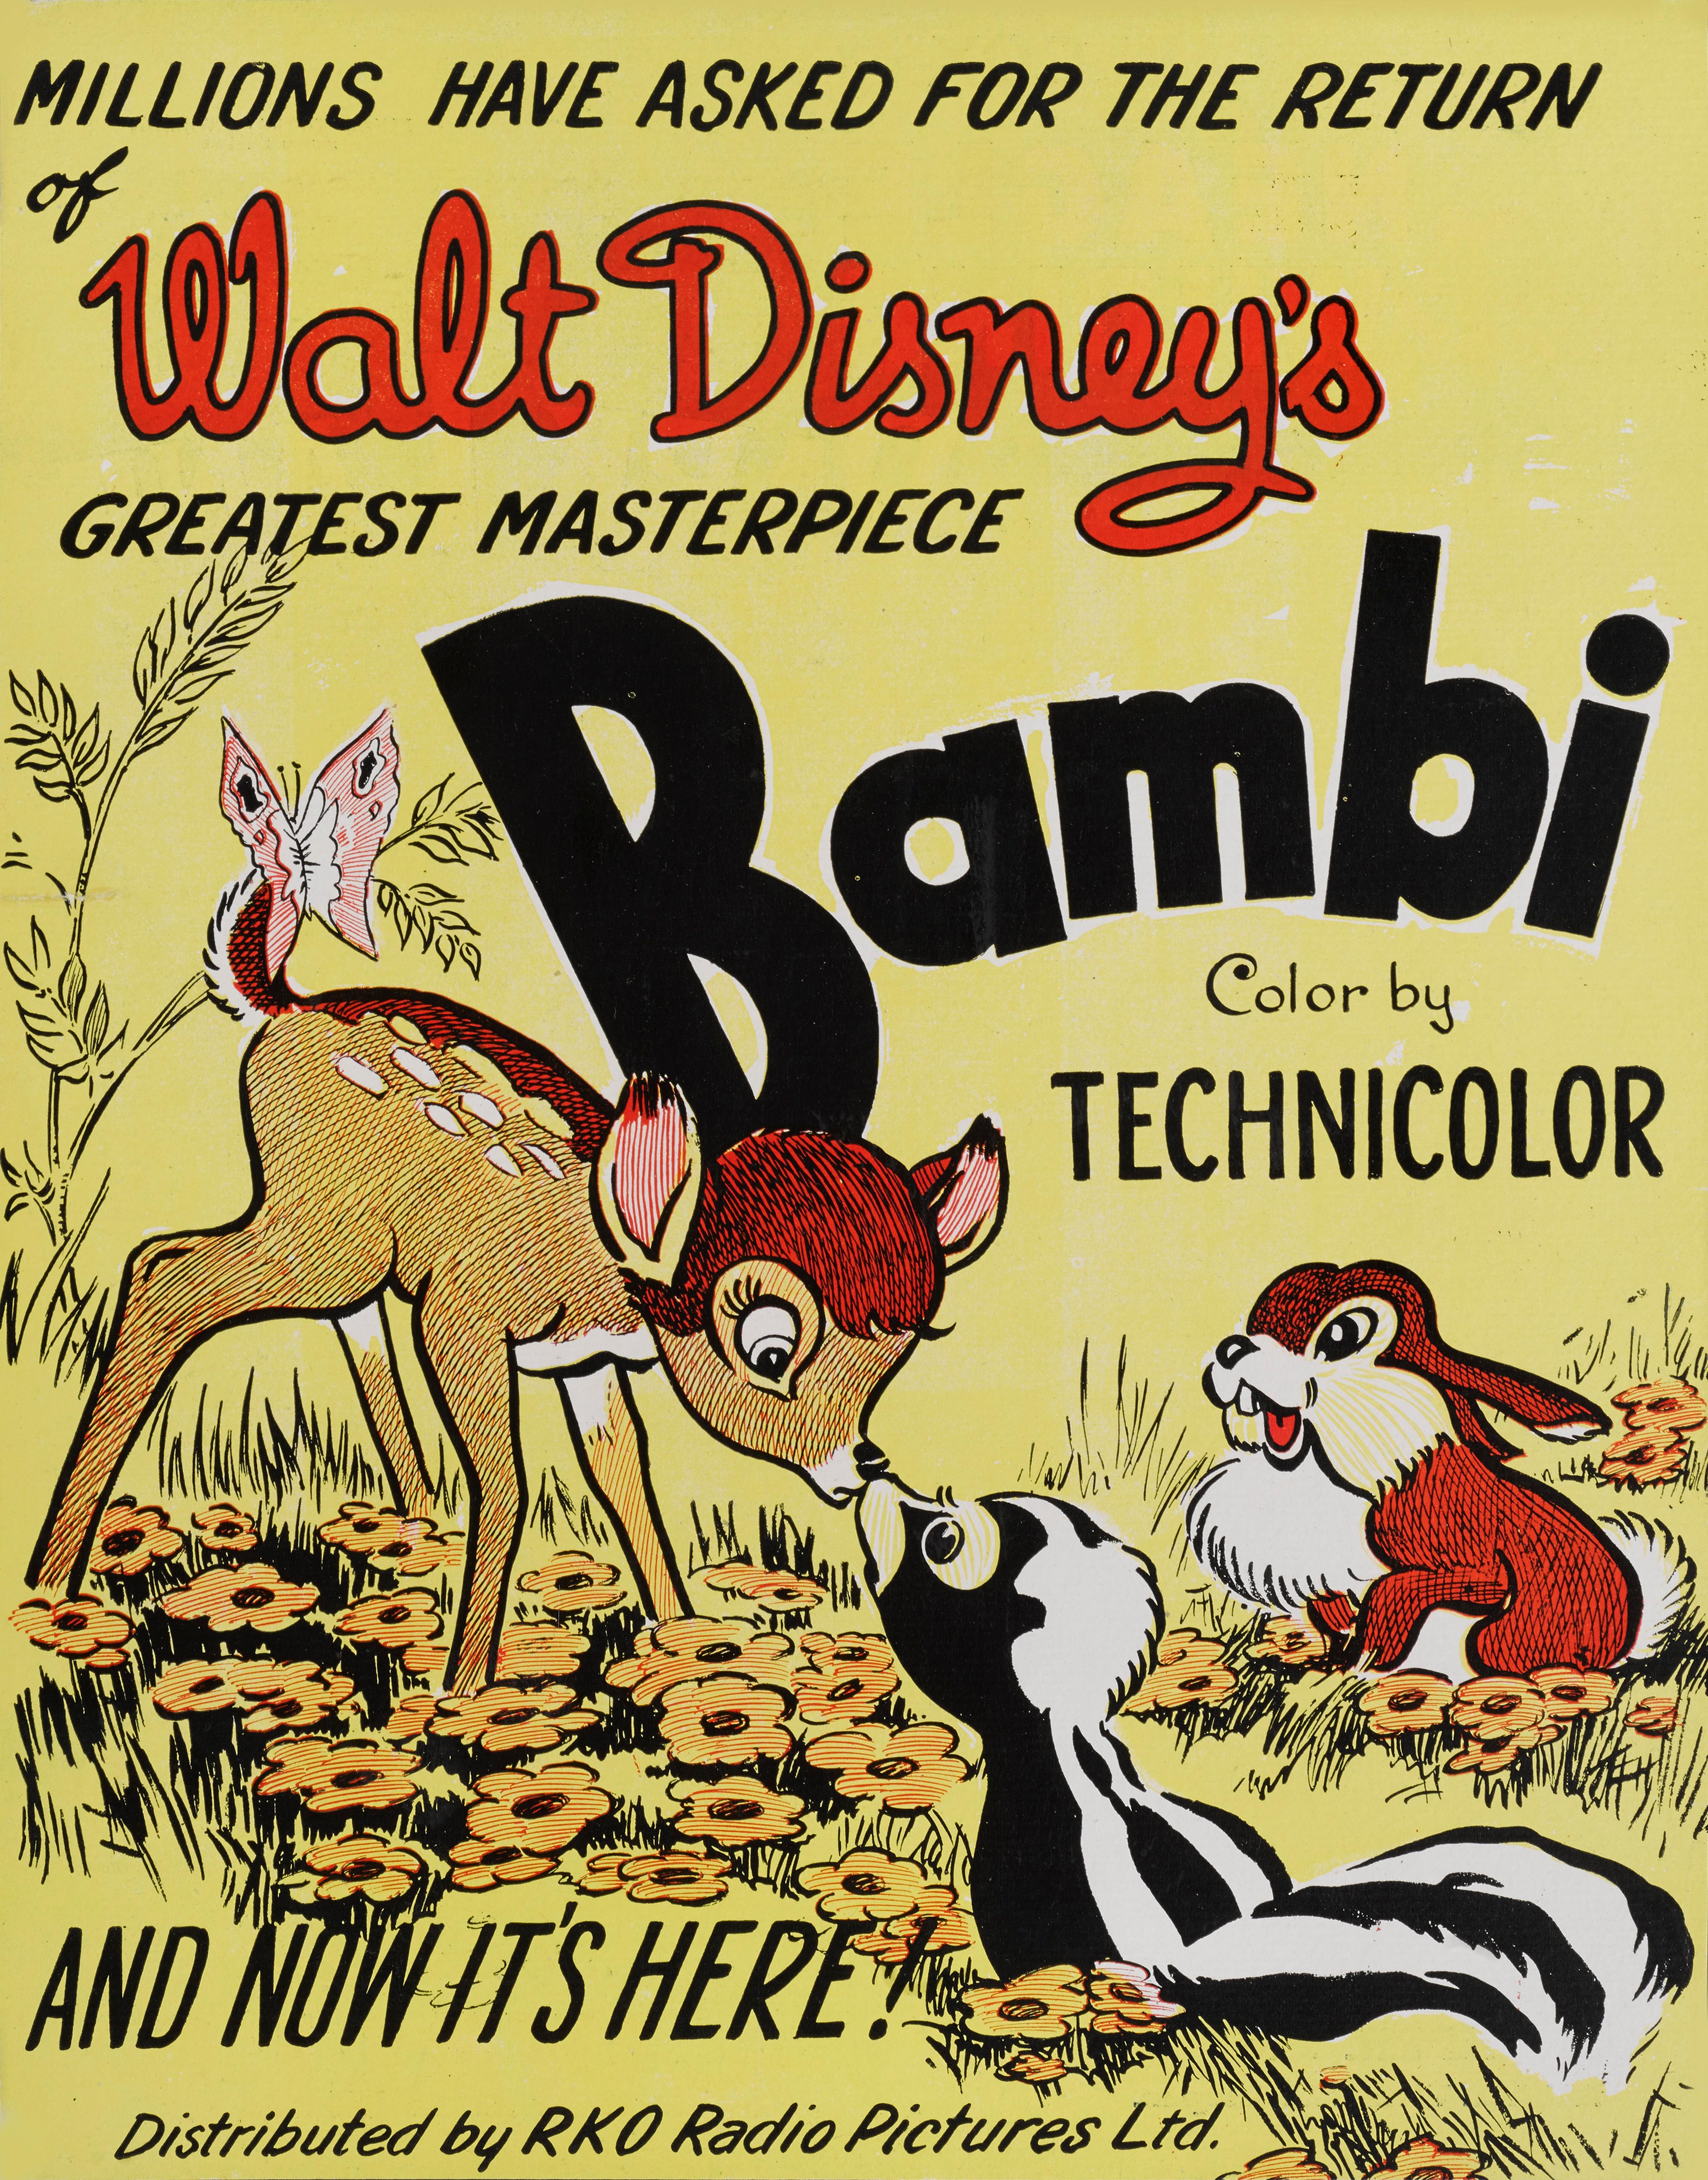 Original British trade advertisement Bambi, 1942.
This trade advertisement was designed for the films rerelease in 1948
This piece is paper backed and would be sent out flat.